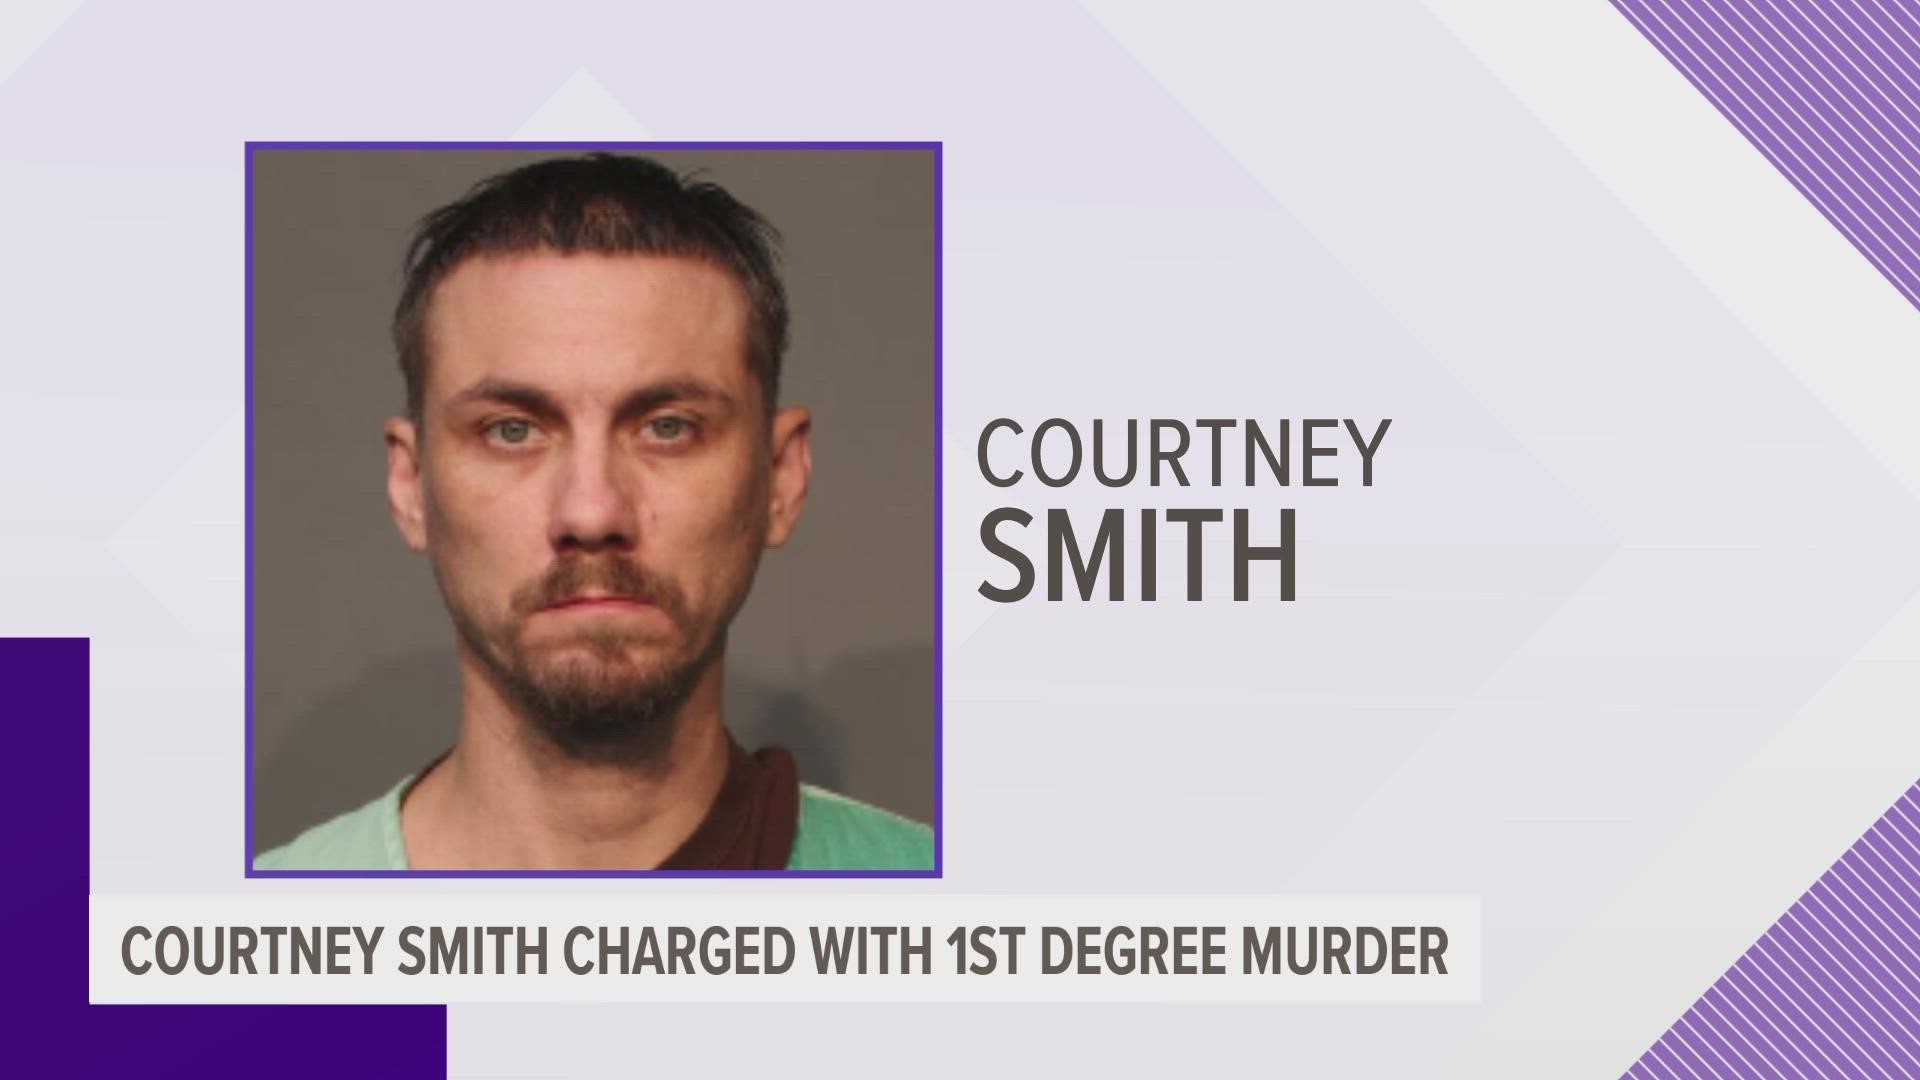 Courtney Smith, 38, is charged with killing 51-year-old Scott Crane of Des Moines.